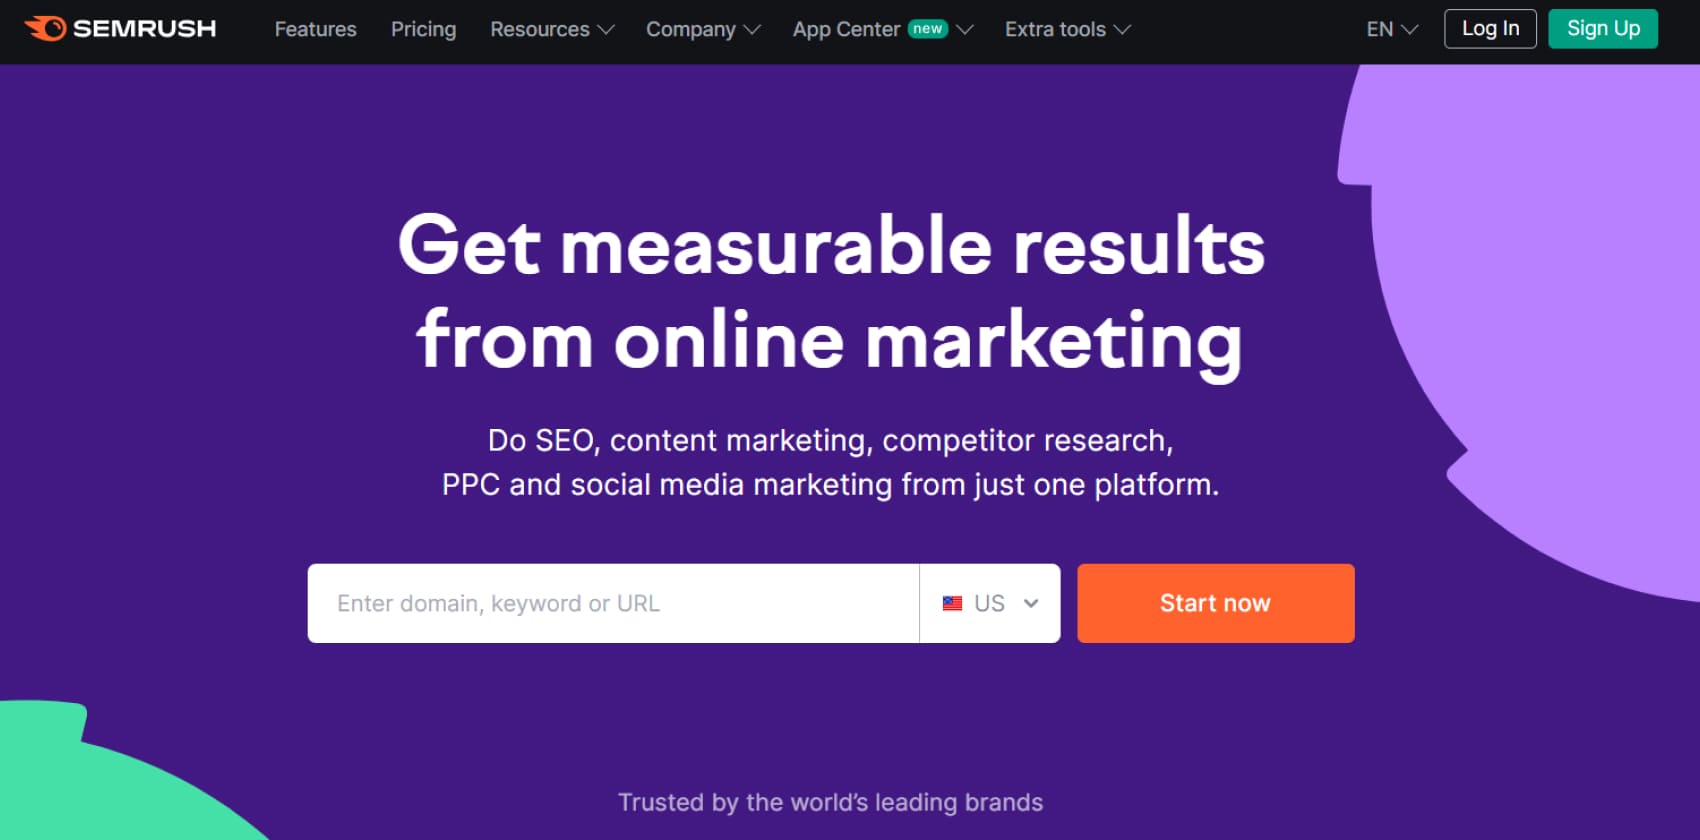 SEMrush is a tool for inbound marketing